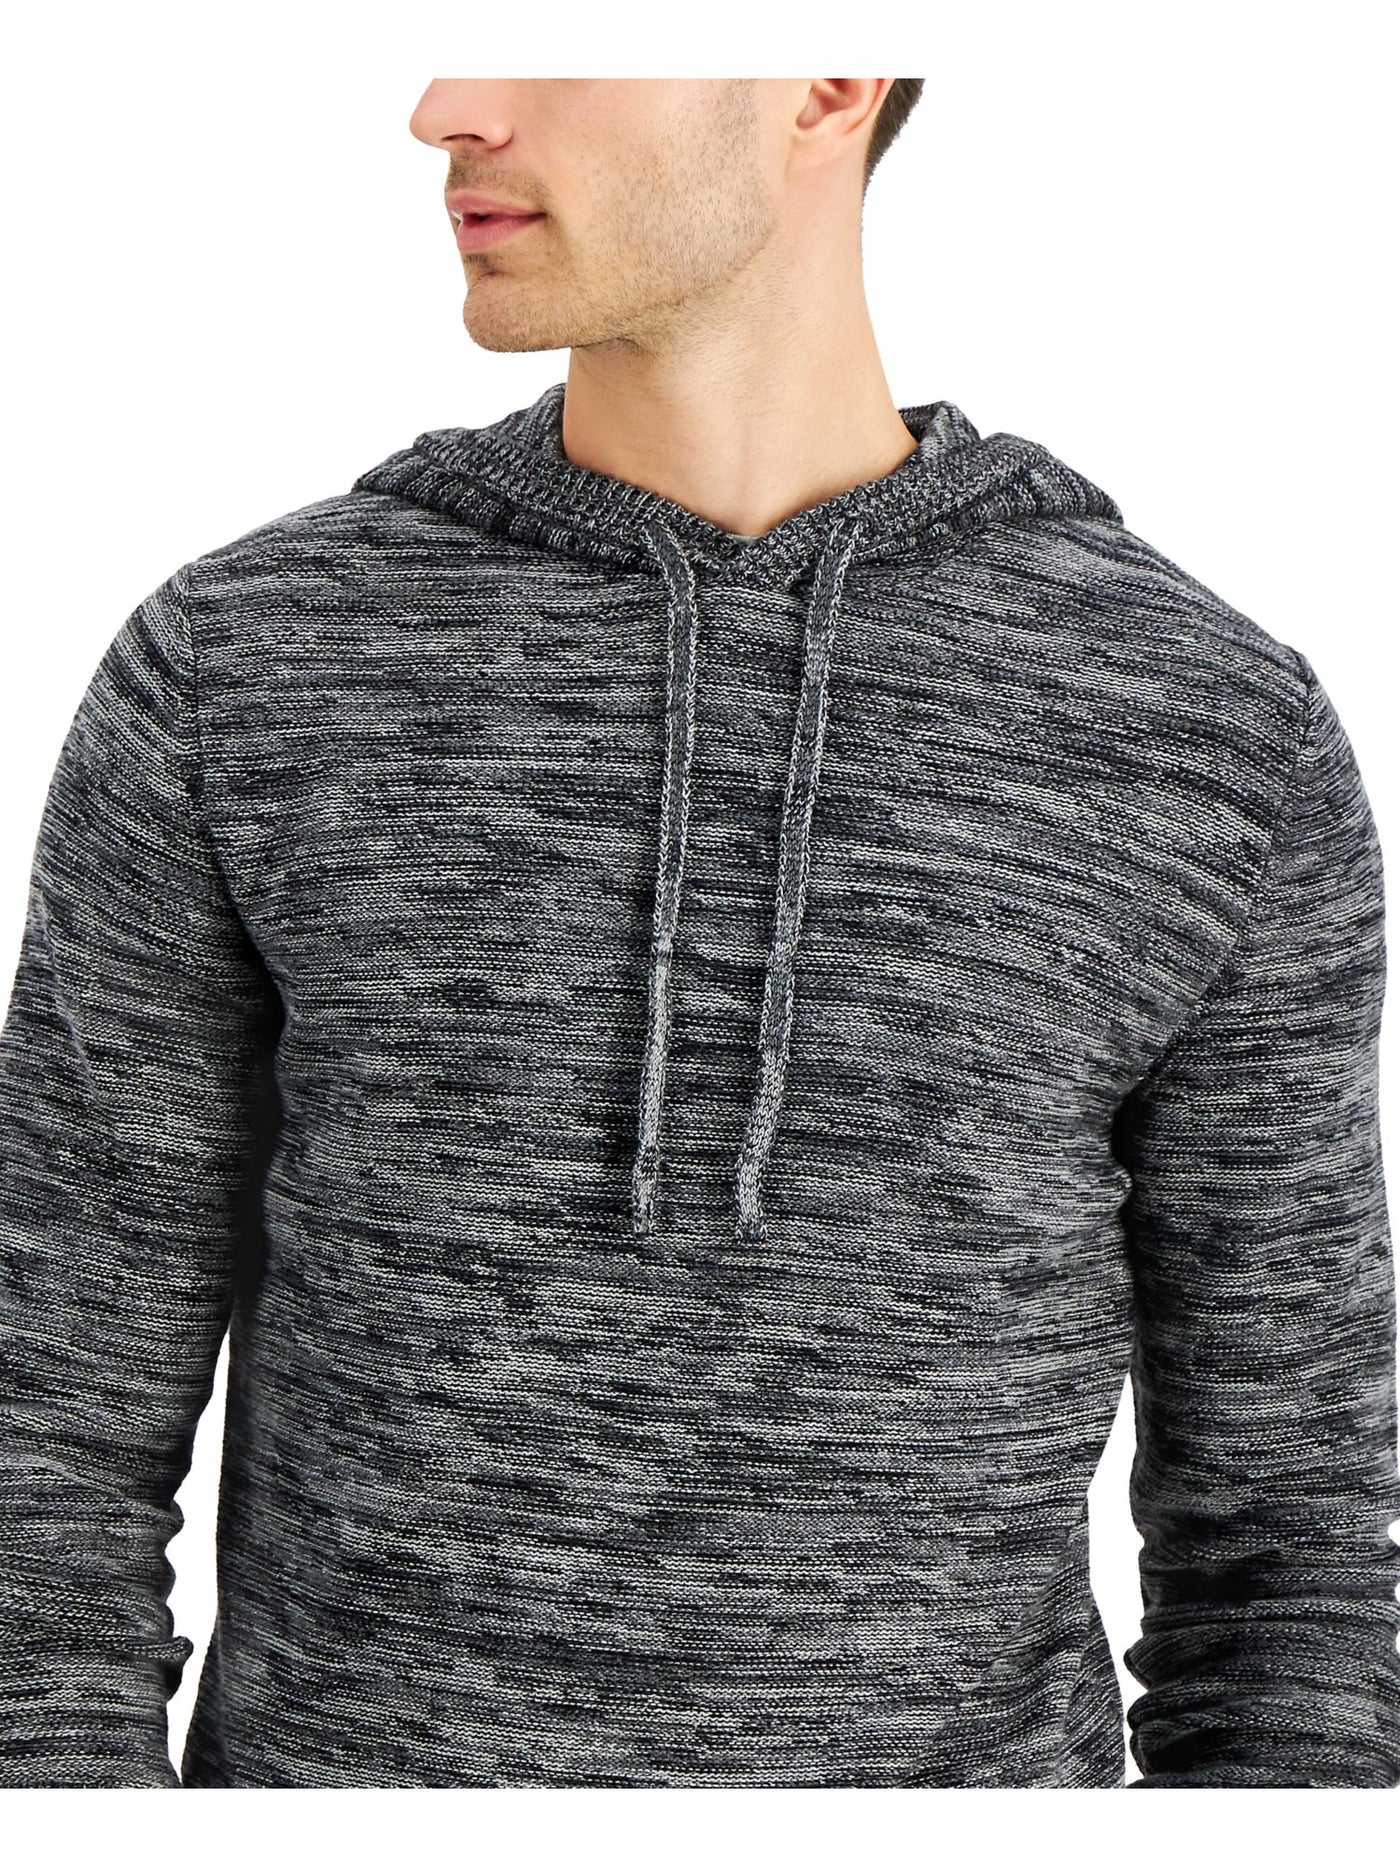 SUN STONE Mens Black Heather Classic Fit Draw String Pullover Sweater S